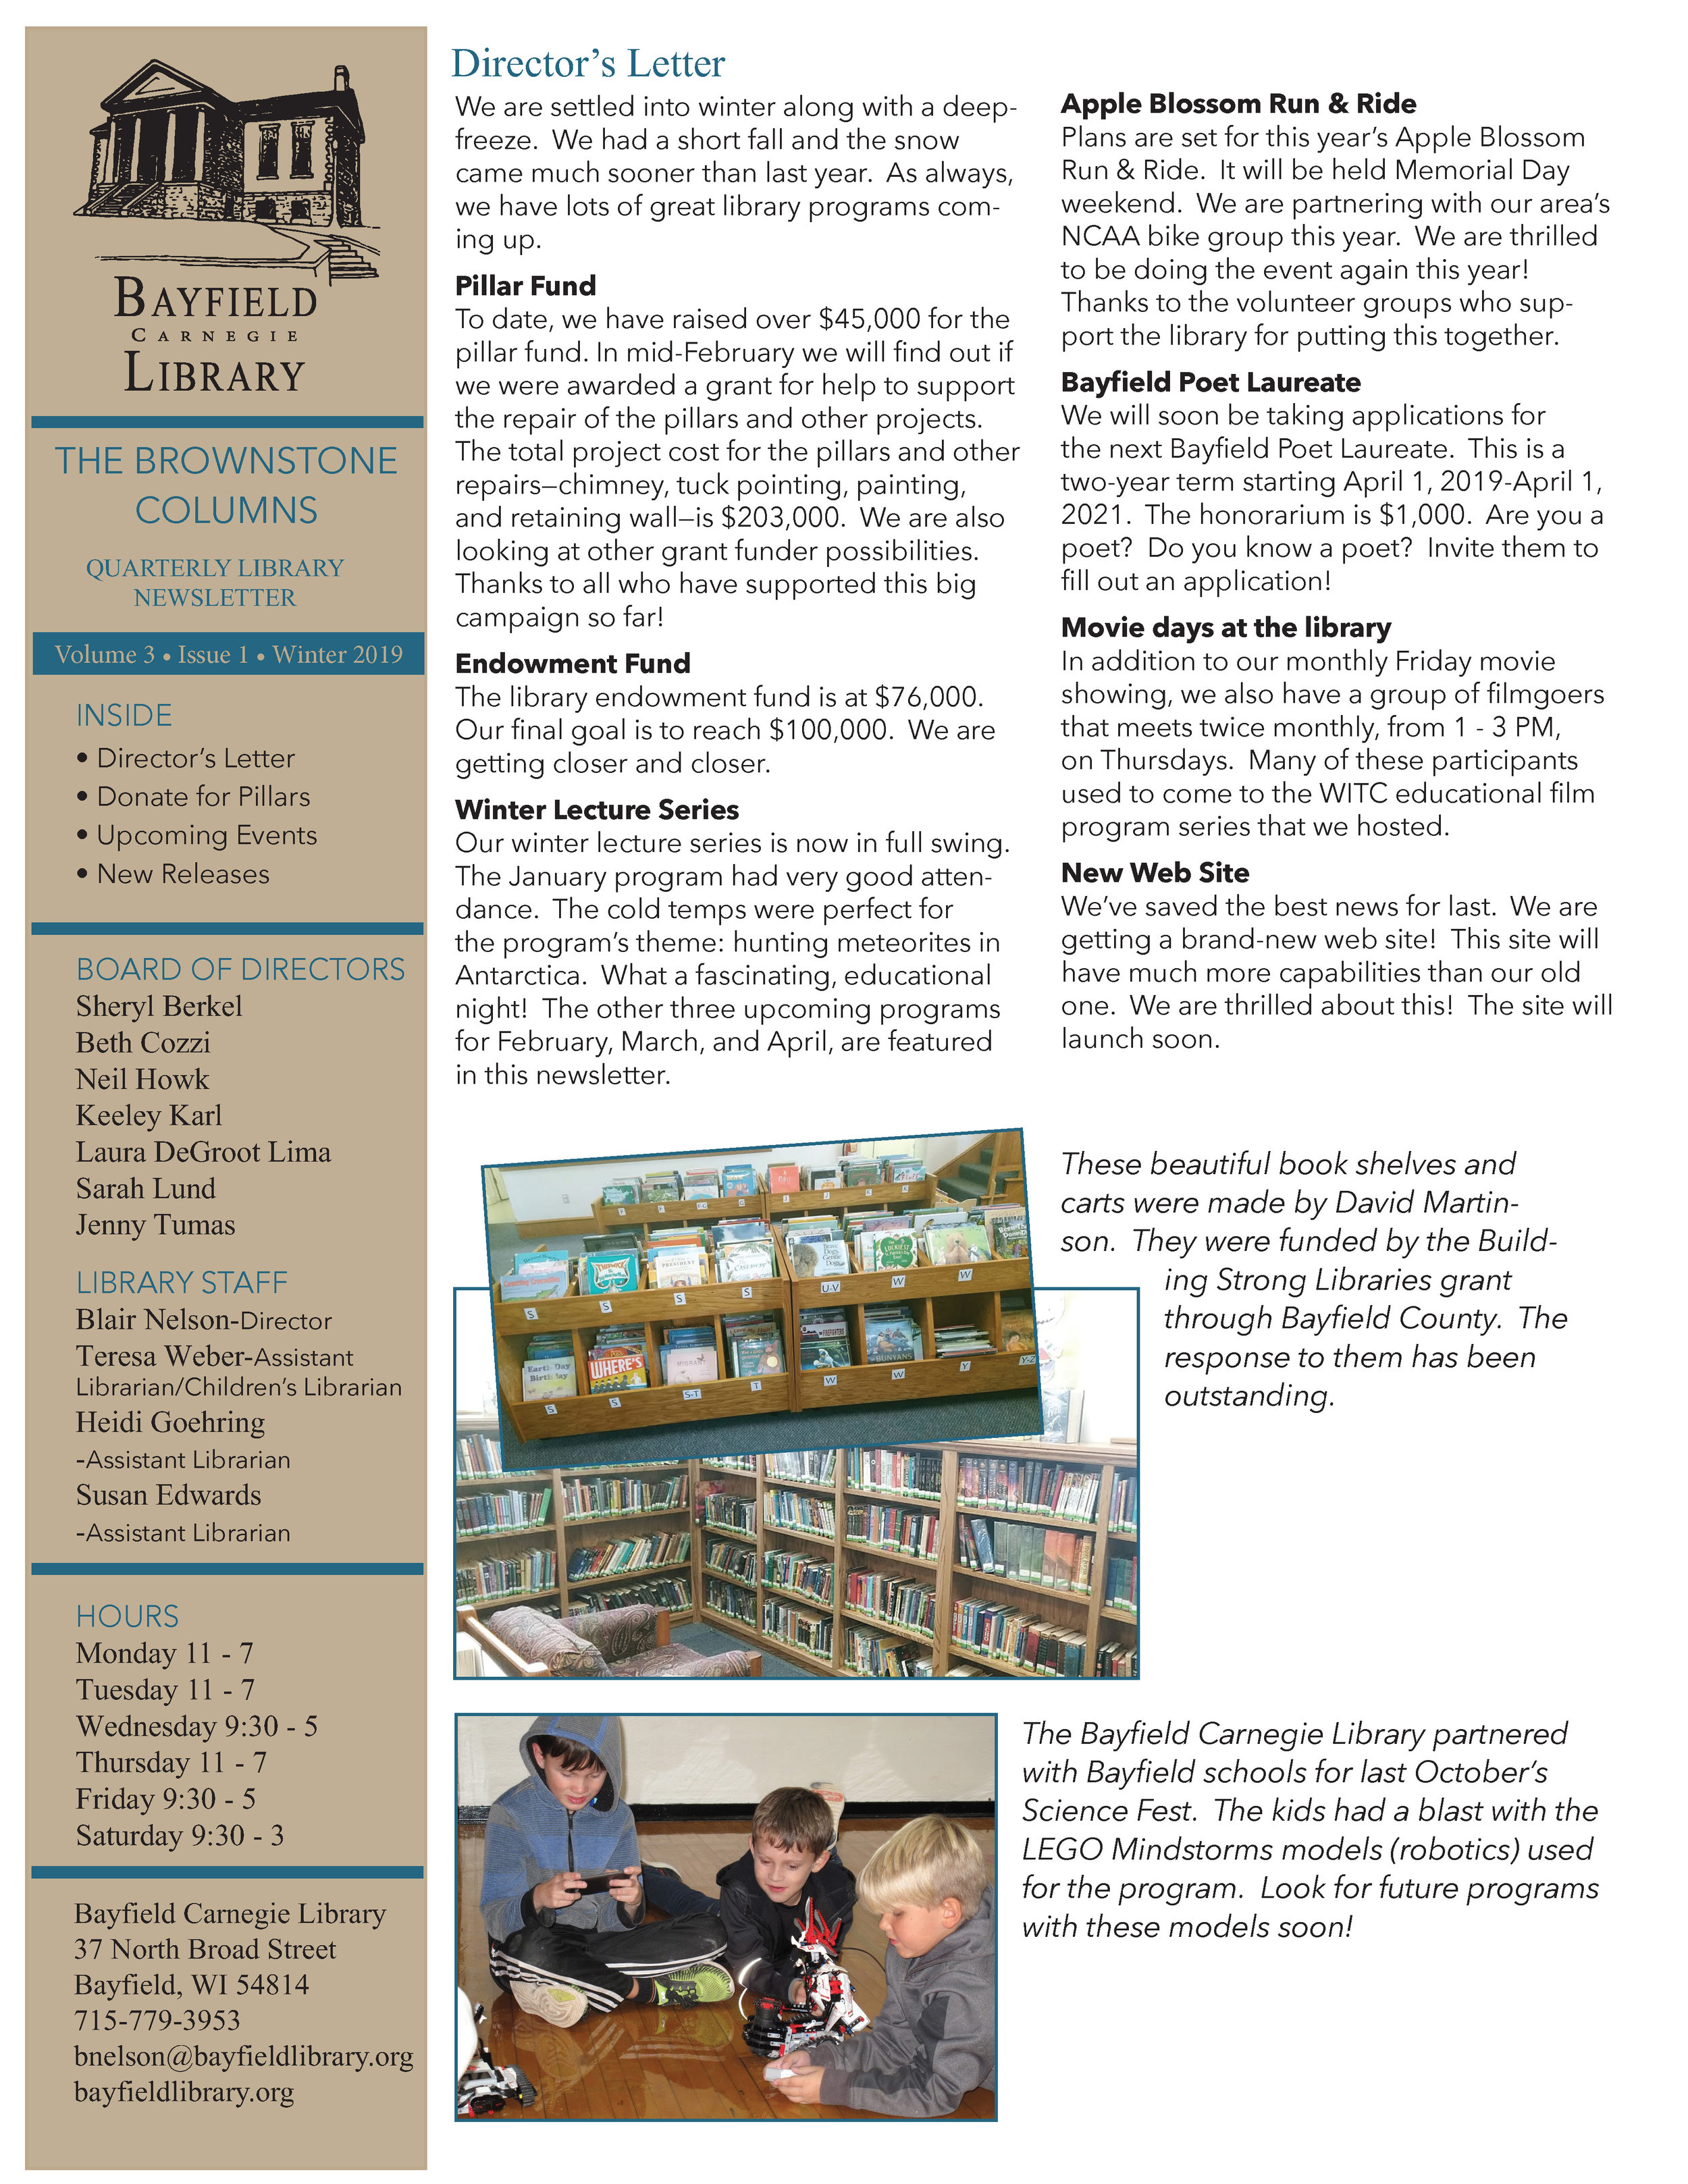 library newsletter winter 2019_2.9_Page_1.jpg